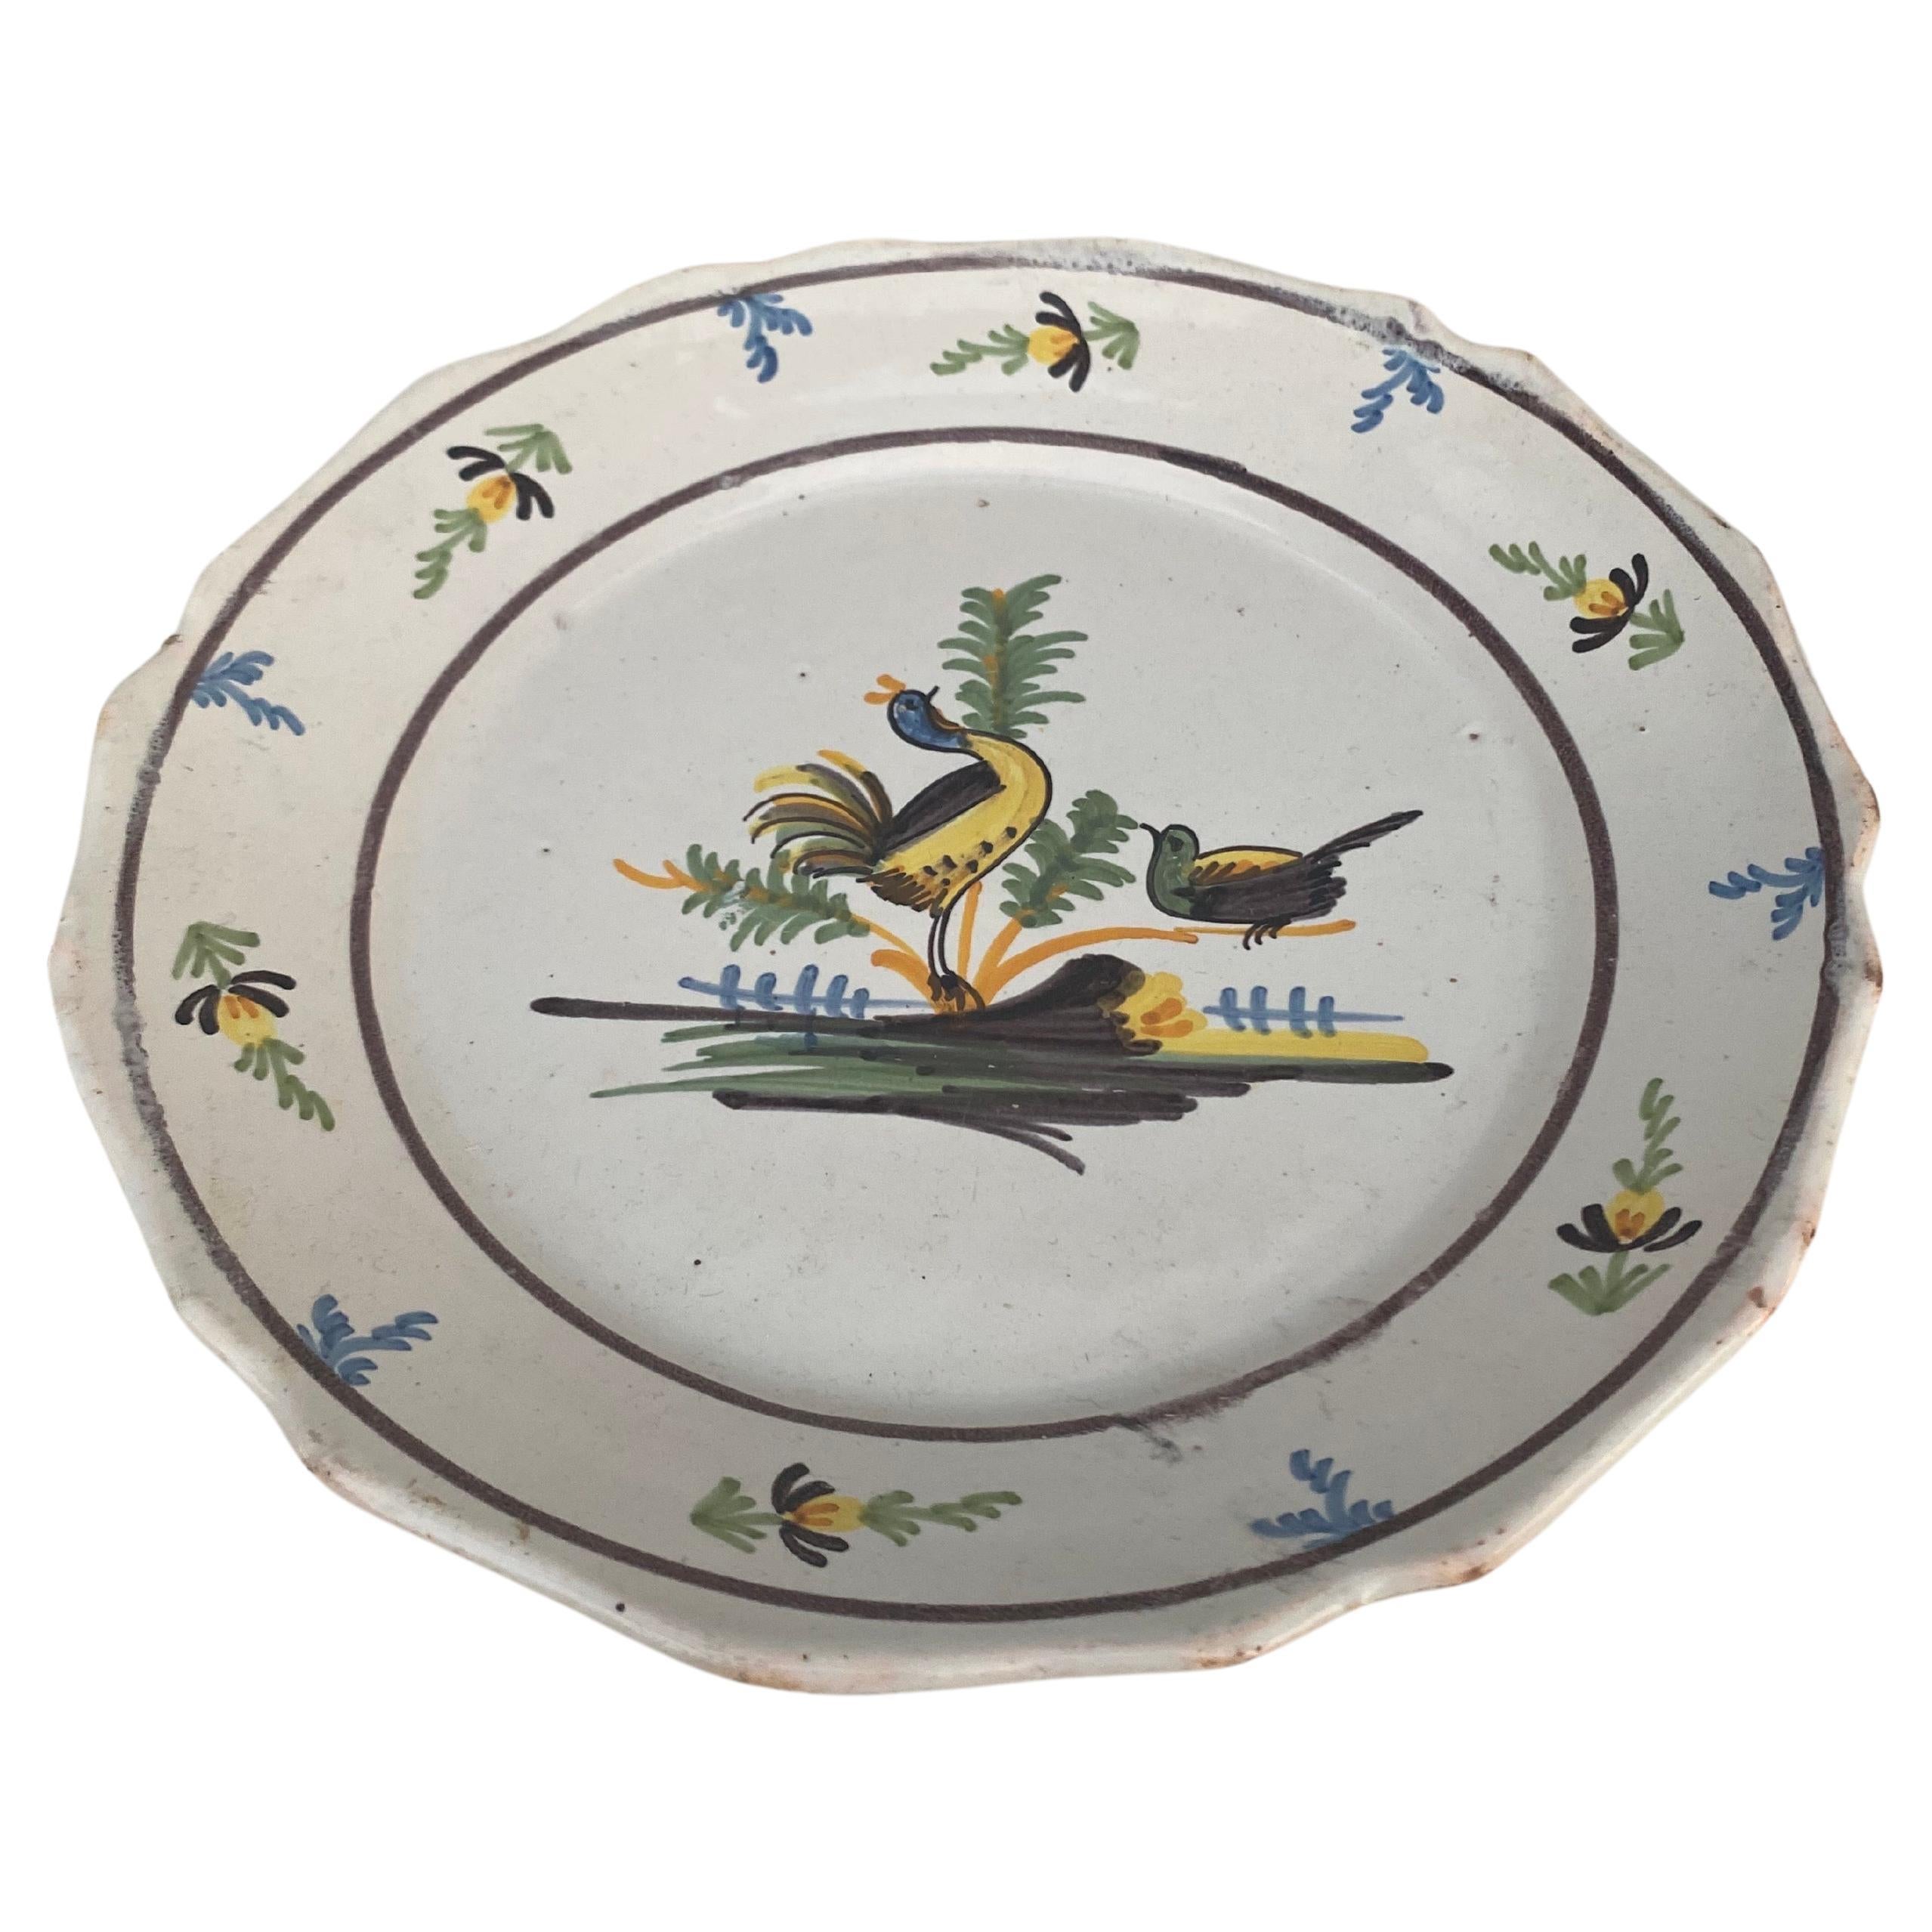 18th Century French faience Nevers plate.
2 birds on the center with a flowers border.